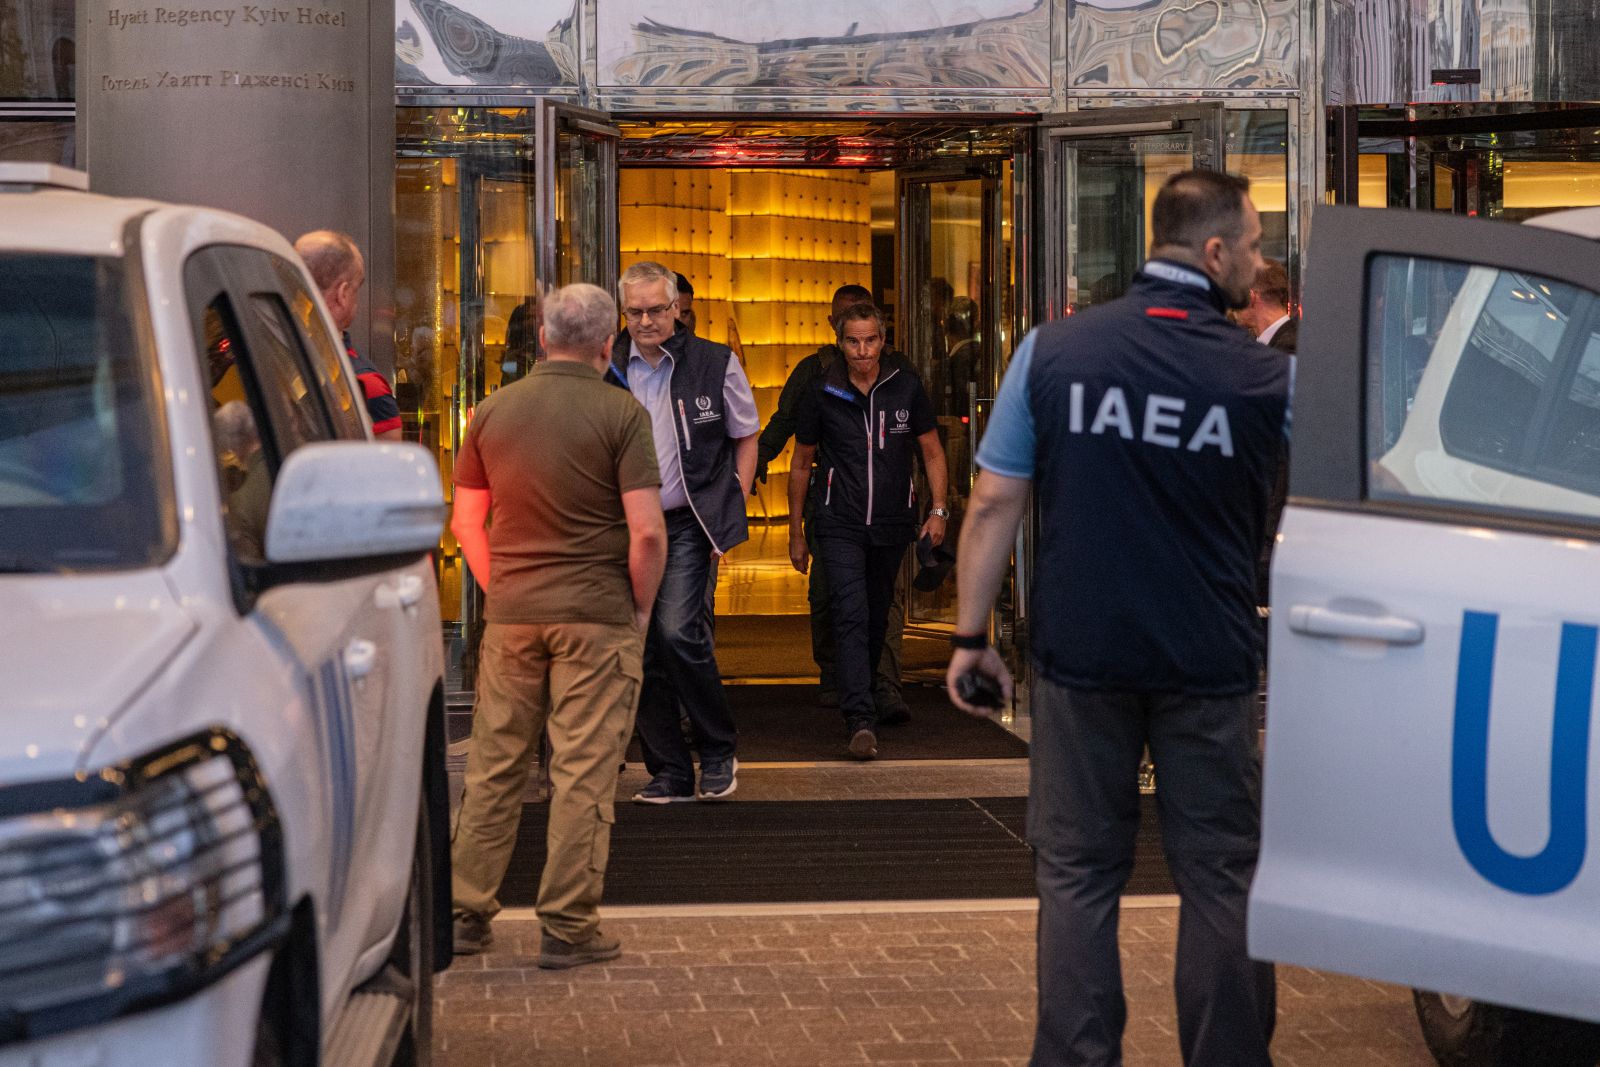 epa10148973 International Atomic Energy Agency (IAEA) Director-General Rafael Mariano Grossi (C) with other IAEA members depart from a hotel in Kyiv as they are expected to visit the Zaporizhzhya Nuclear Power Plant, Ukraine, 31 August 2022. IAEA Director-General Rafael Grossi leads an IAEA expert mission that comprises IAEA nuclear safety, security, and safeguards staff as they set for their official visit in Ukraine to the Zaporizhzhya Nuclear Power Plant (ZNPP).  EPA/ROMAN PILIPEY